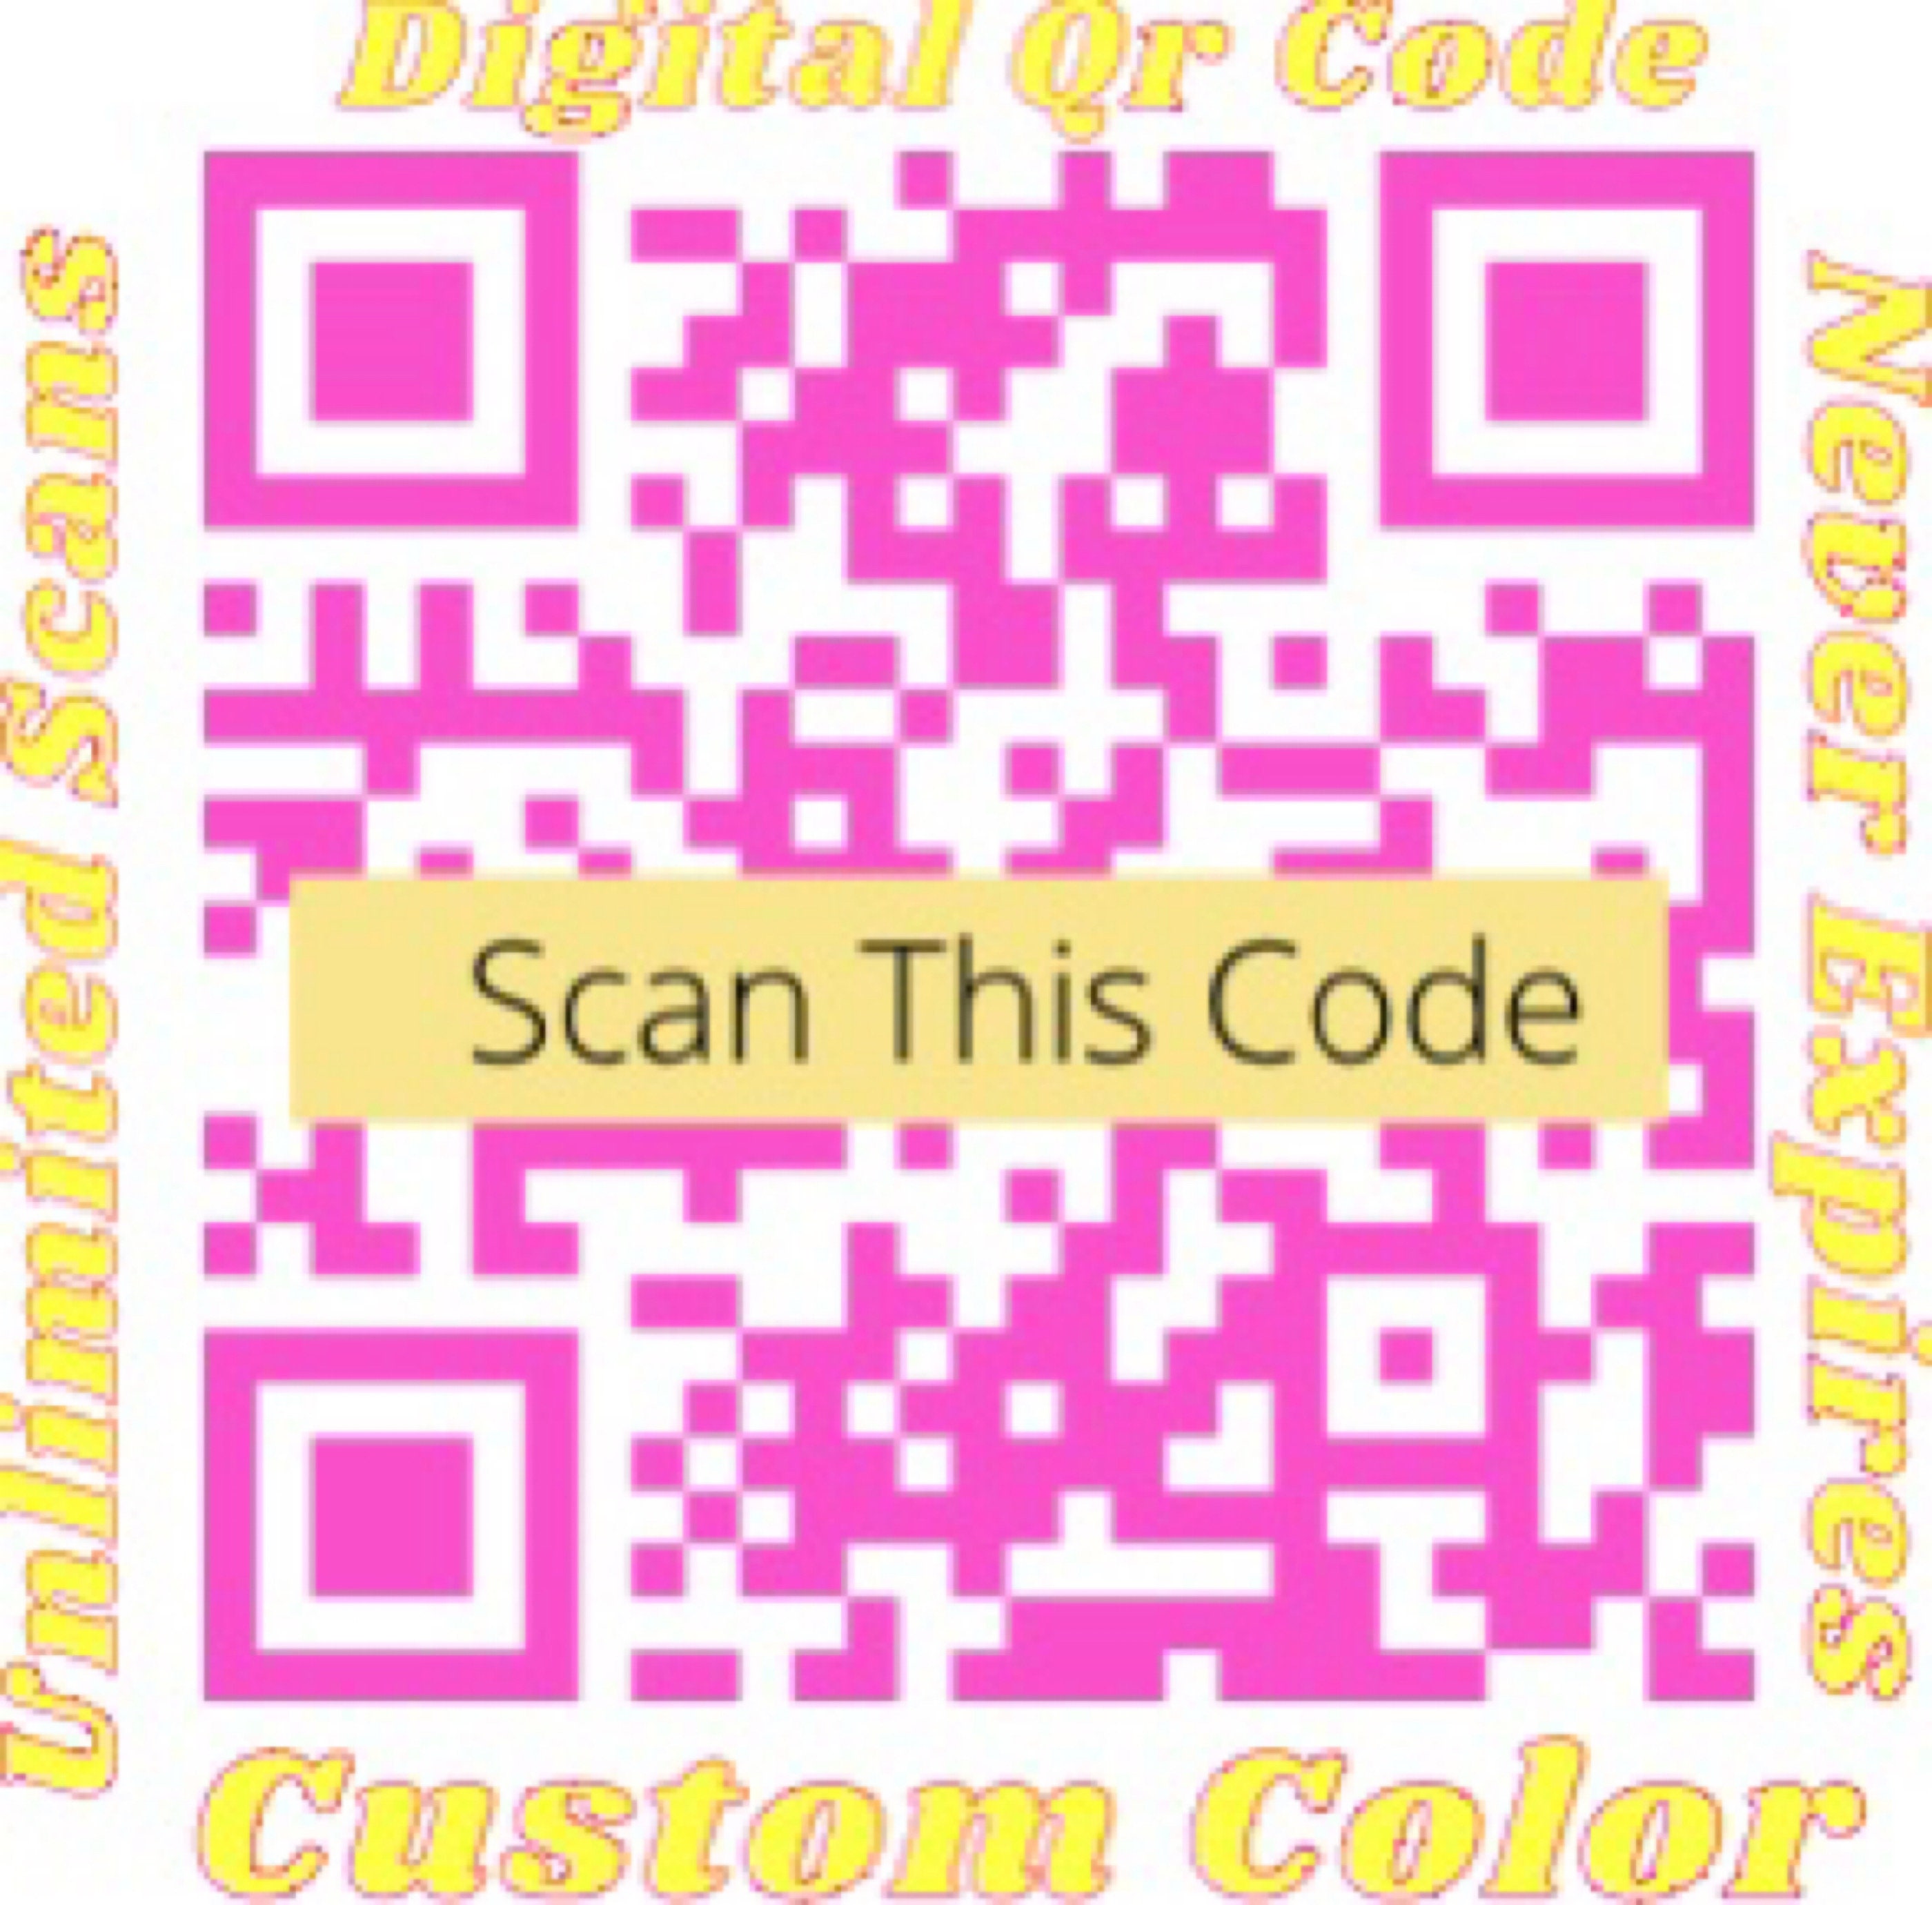 Weddings, Scan Business Code Registry, Baby Codes Pay Digital Qr Codes Custom Code Qr Etsy to Qr - Qr Cards, Signs for Download Shower